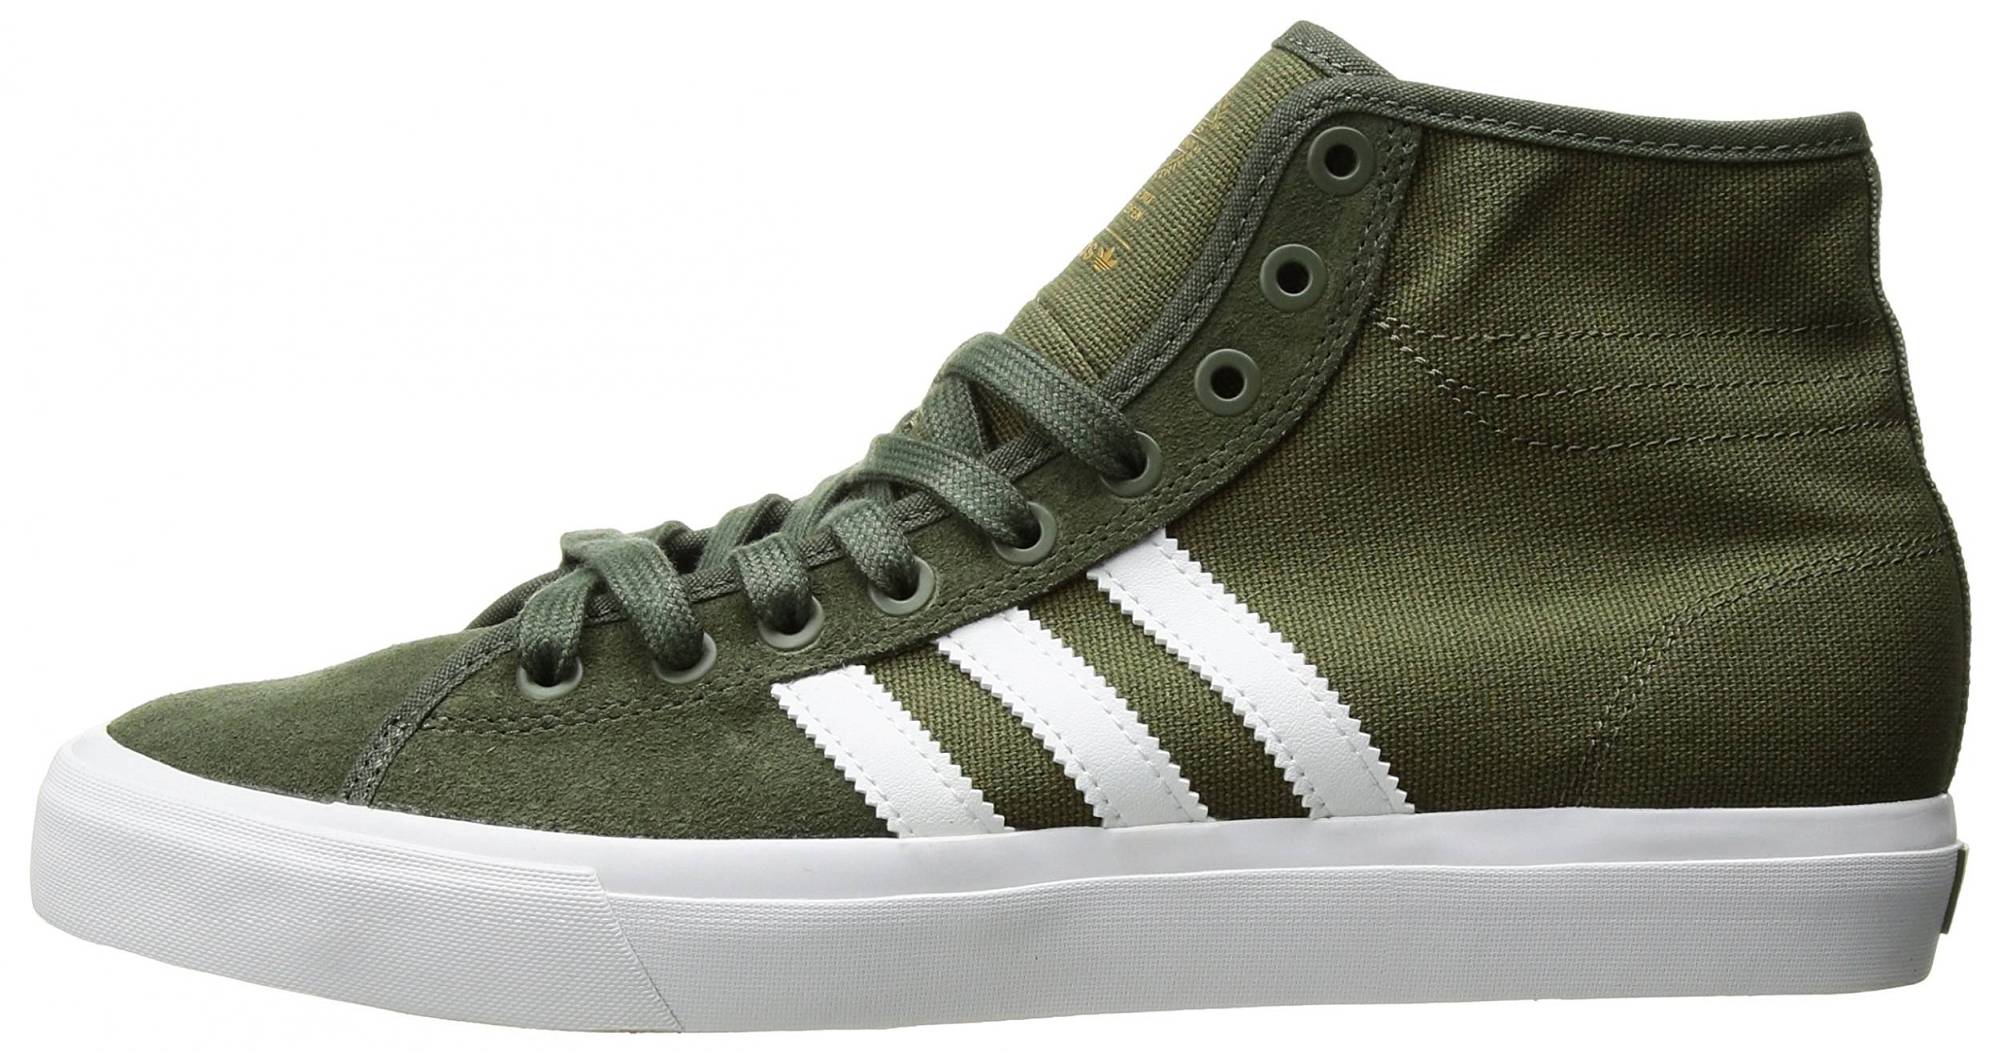 Adidas Matchcourt High RX – Shoes Reviews & Reasons To Buy